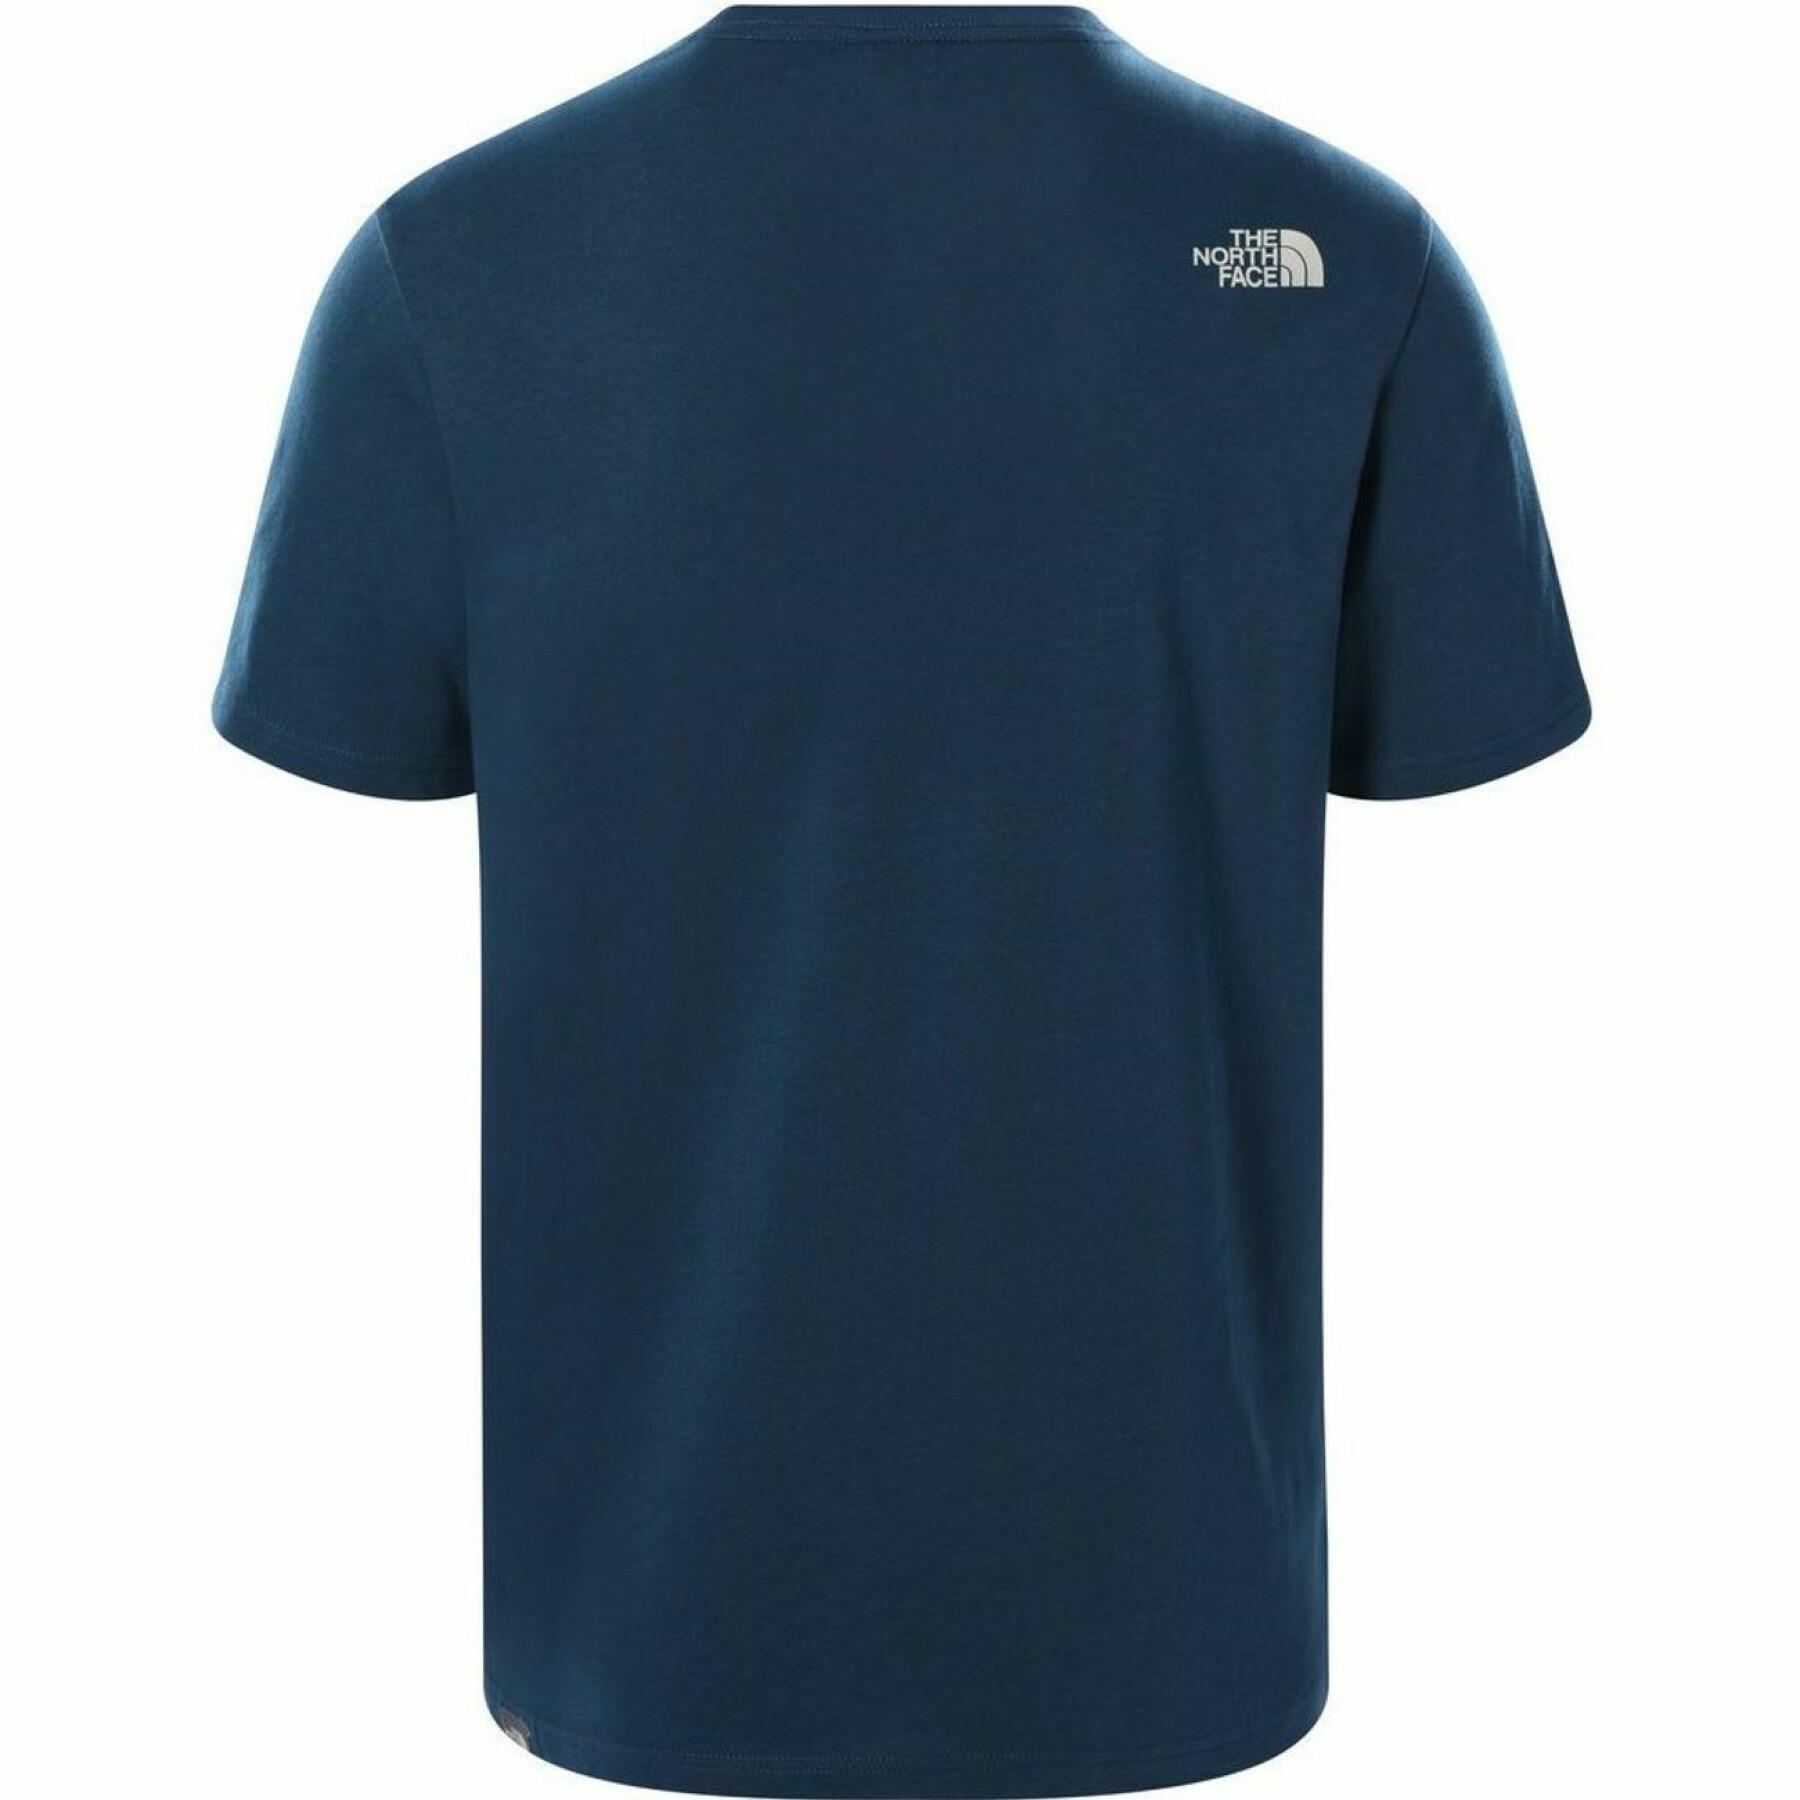 T-shirt Clássica The North Face Woodcut